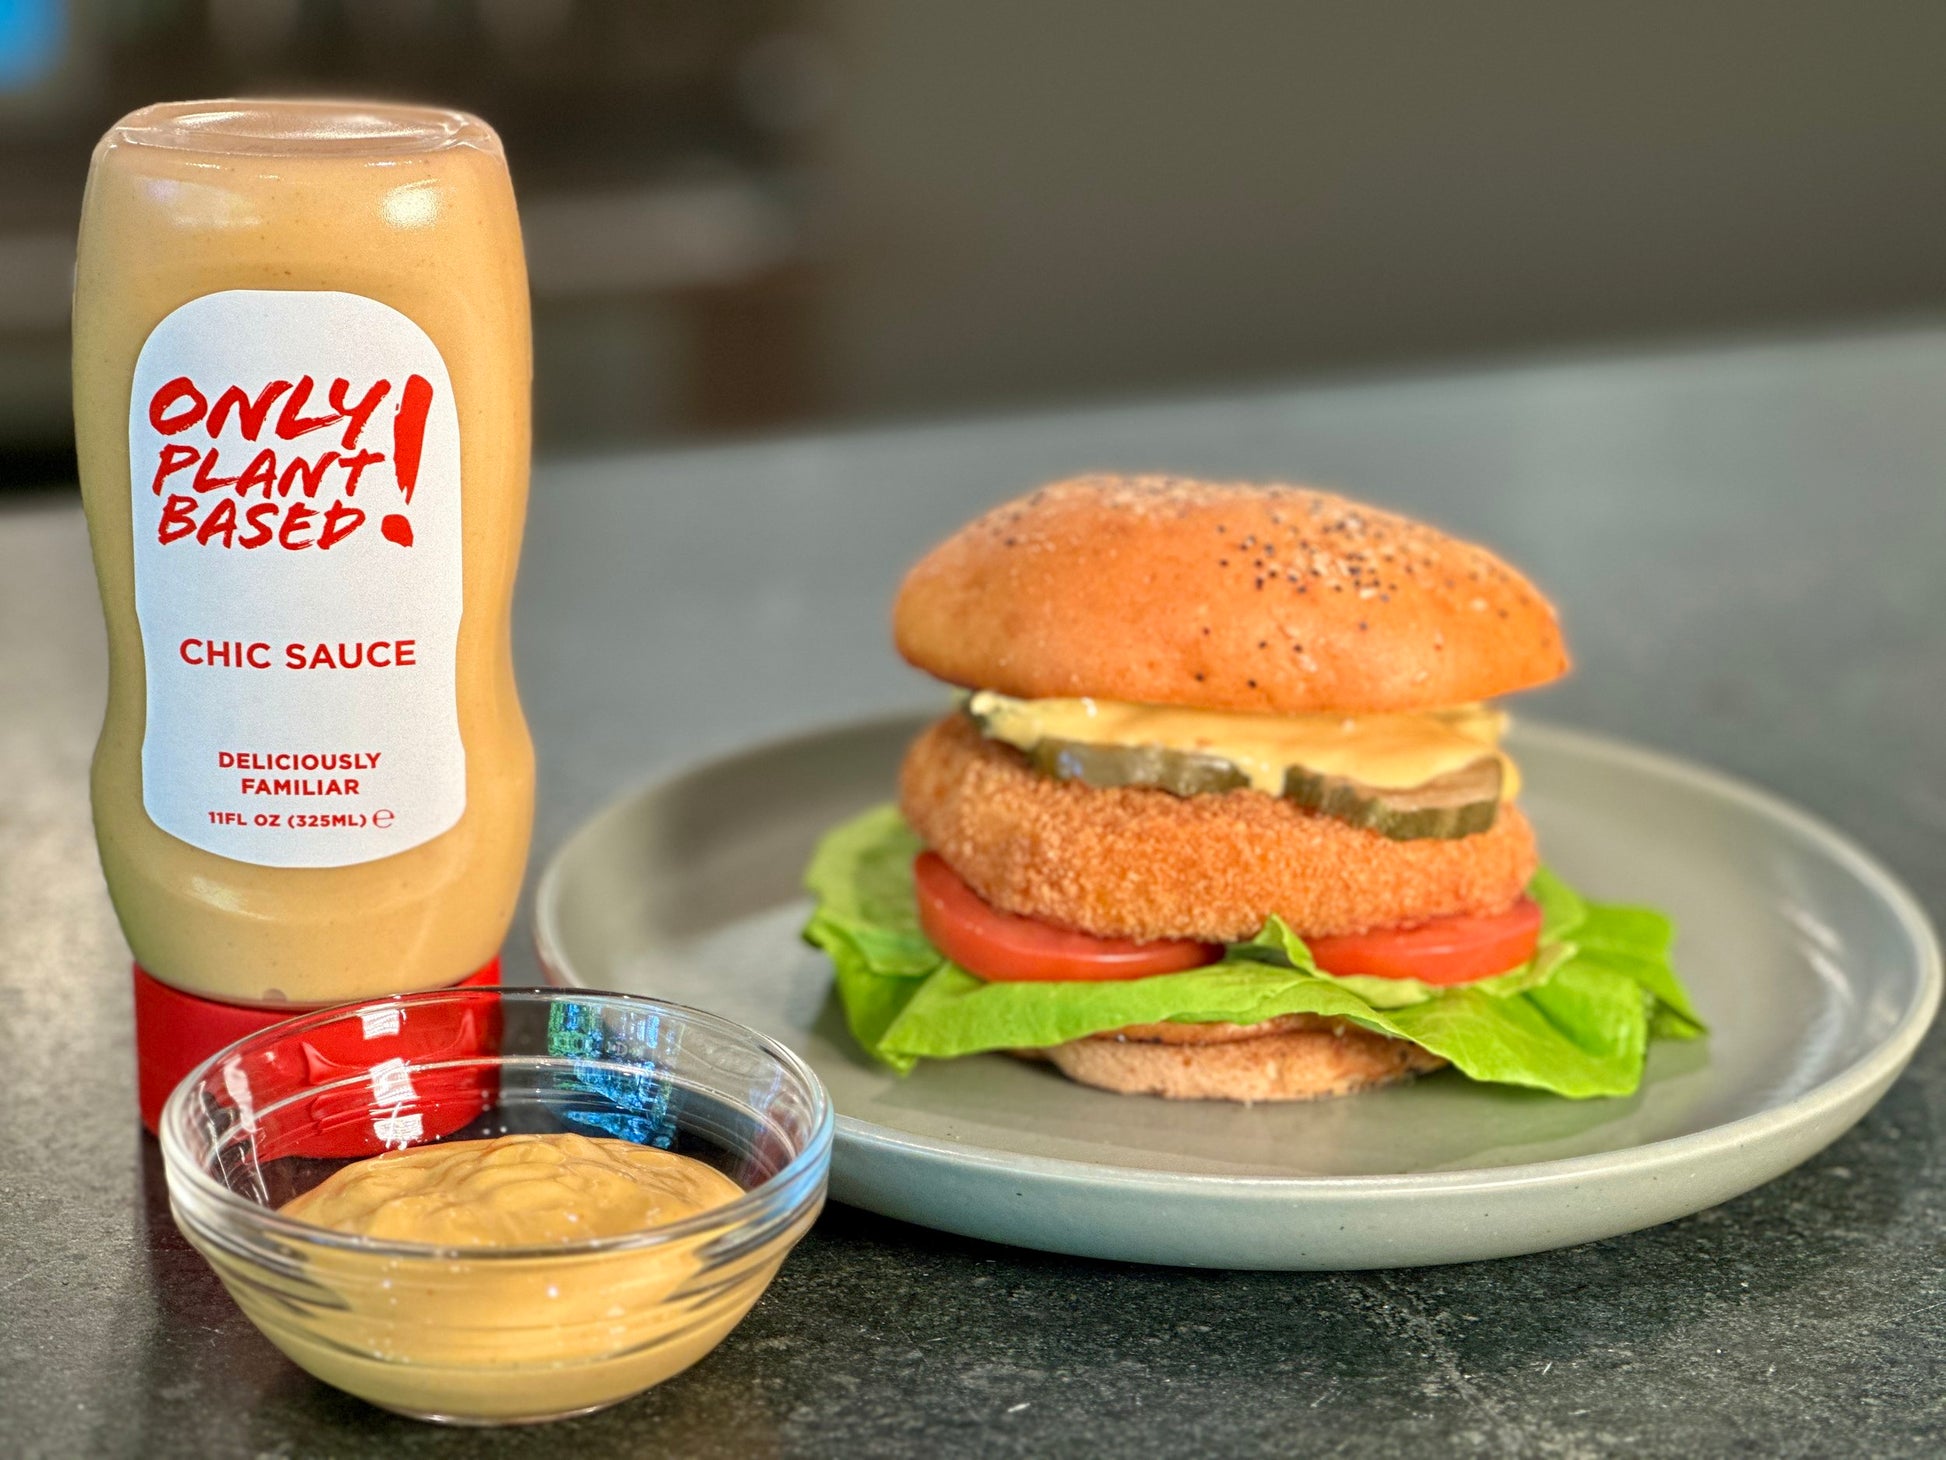 Fantastic Chic Sauce paired with Plantasia Foods gluten-free and soy-free chick'n patty